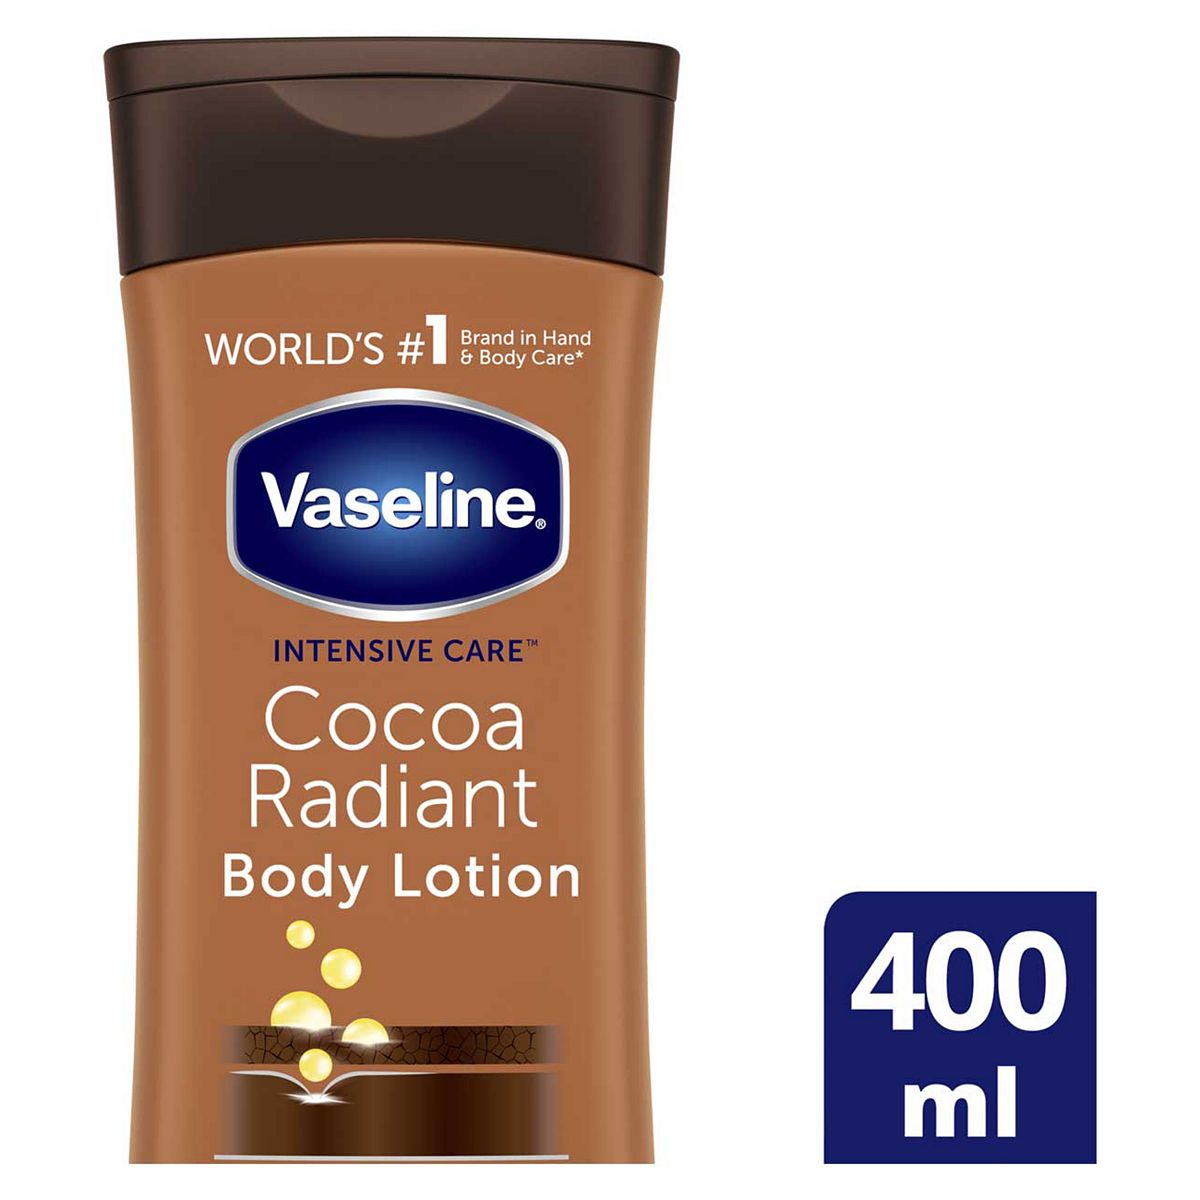 Vaseline Intensive Care Cocoa Radiant Body Lotion 400 ml Men's Toiletries Boots   